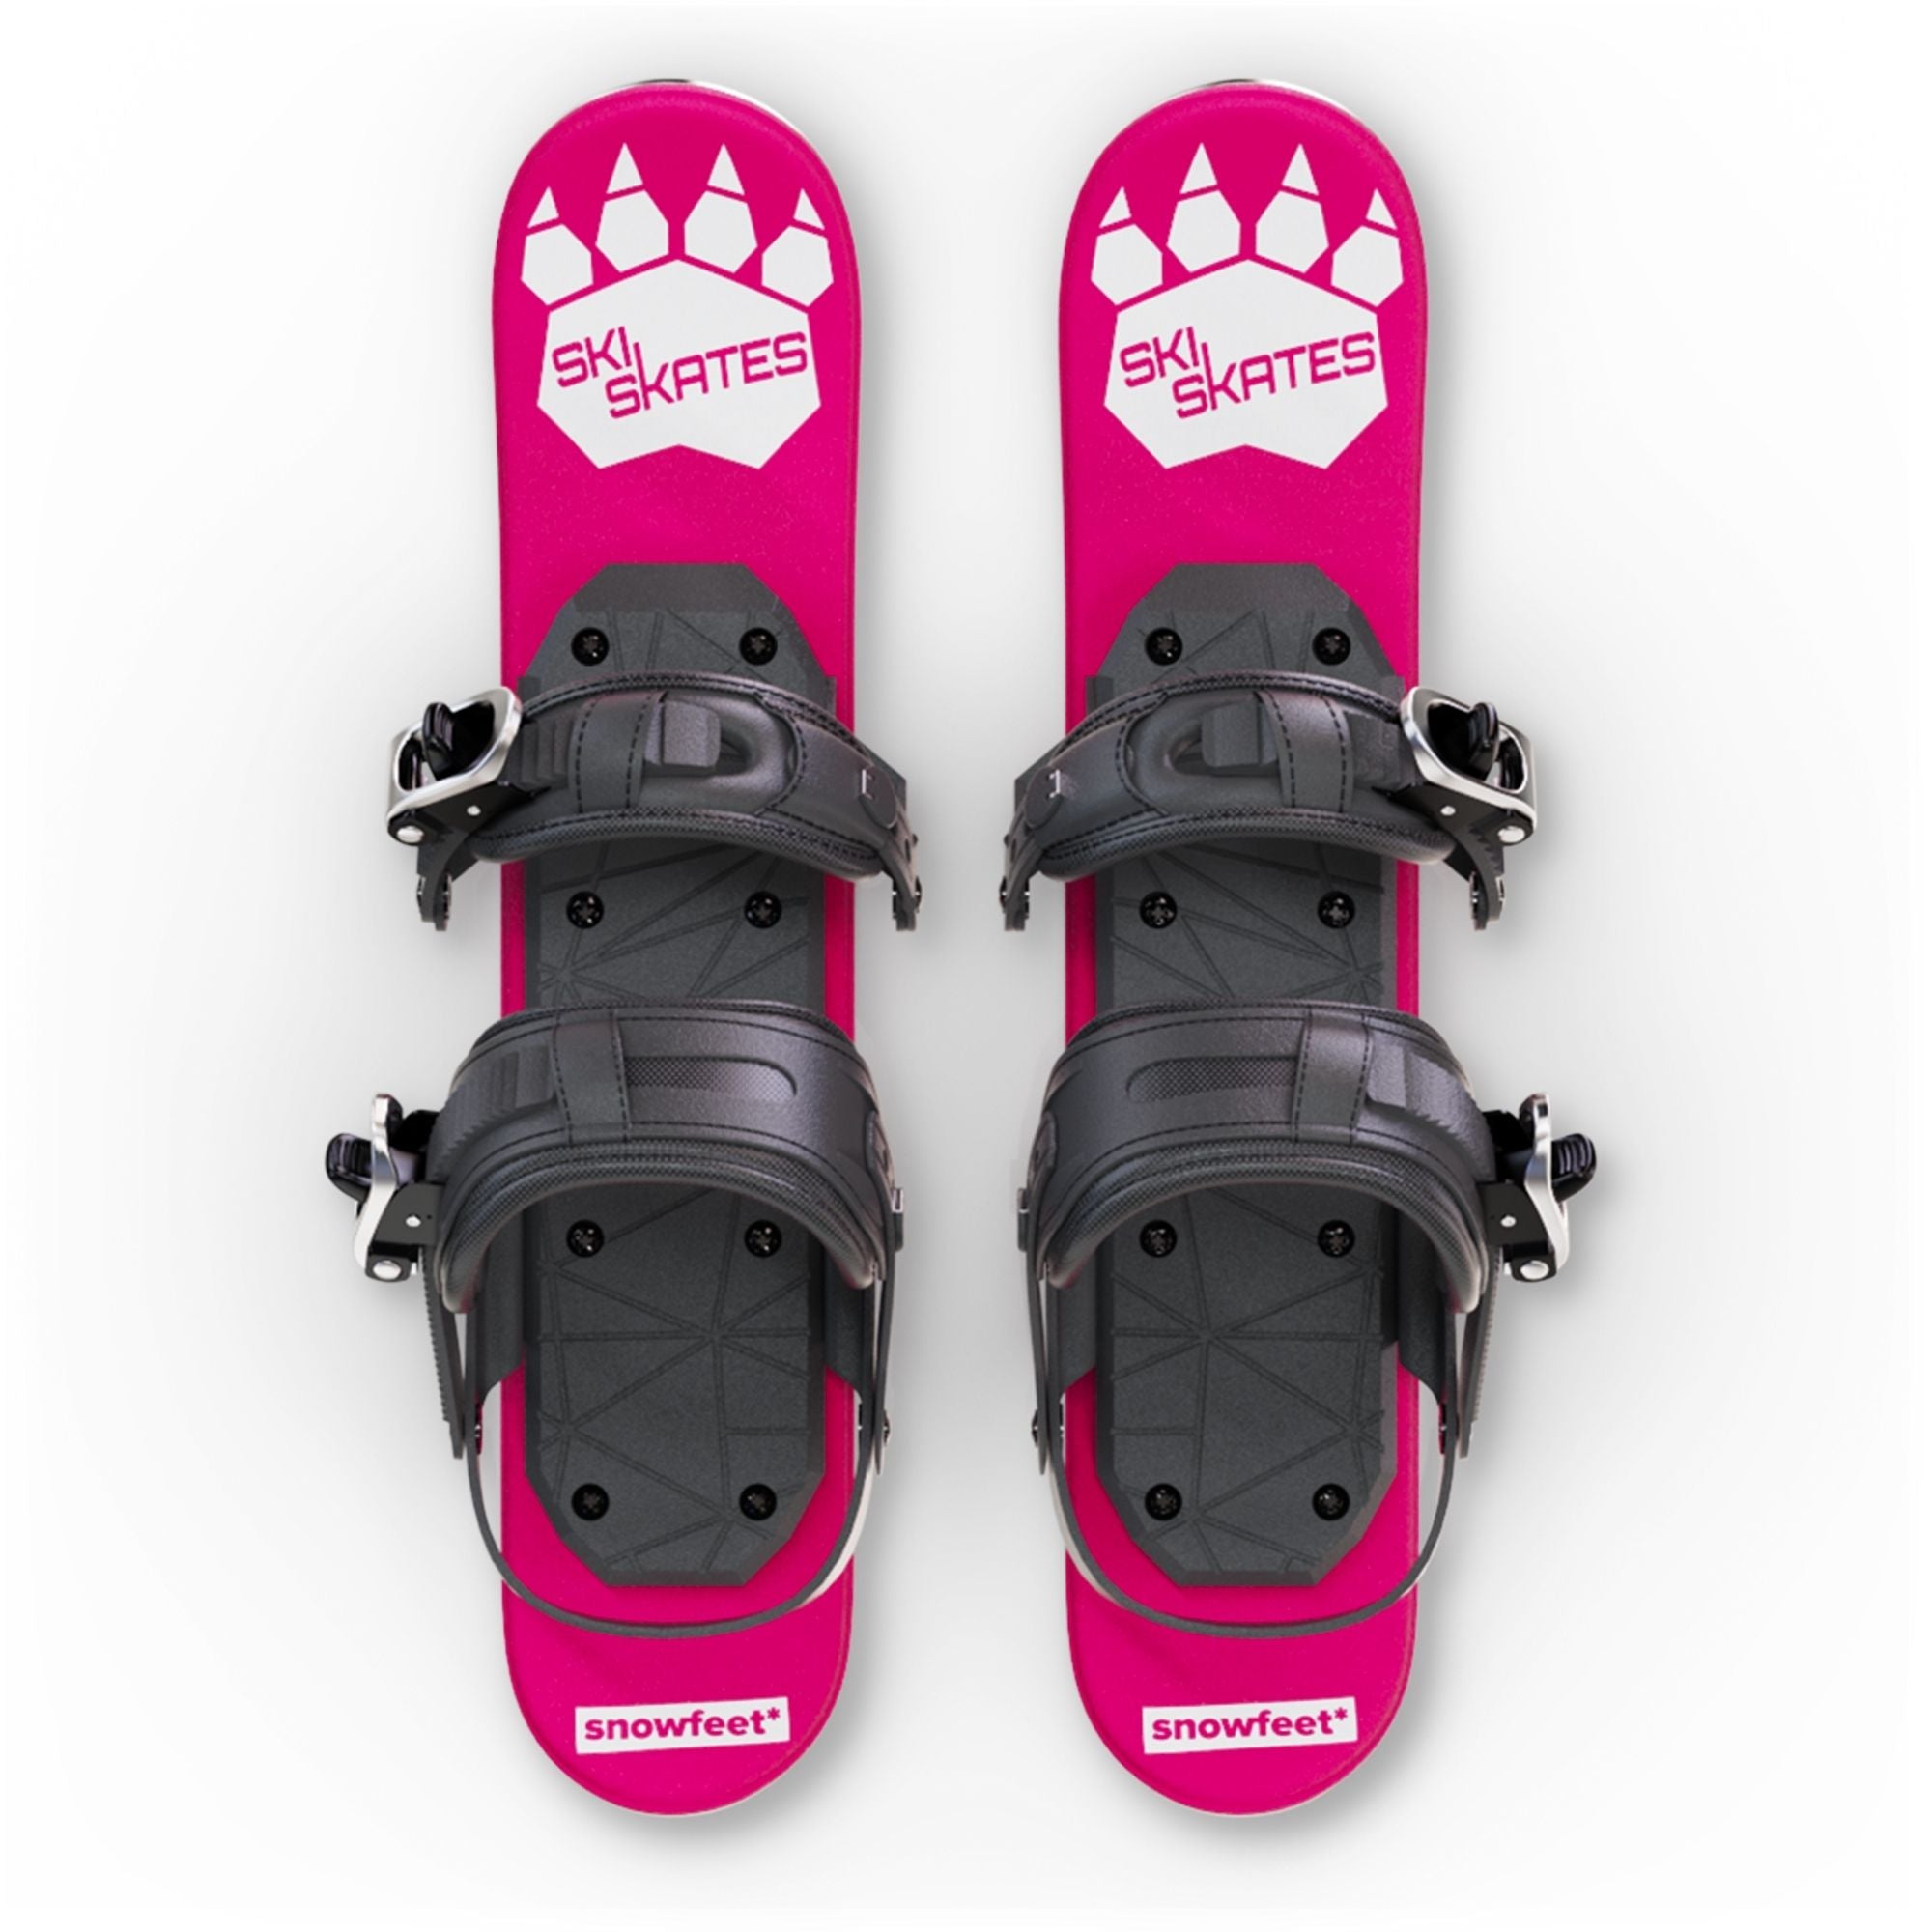 Snowfeet, Mini Skis That Easily Clip on Over Boots